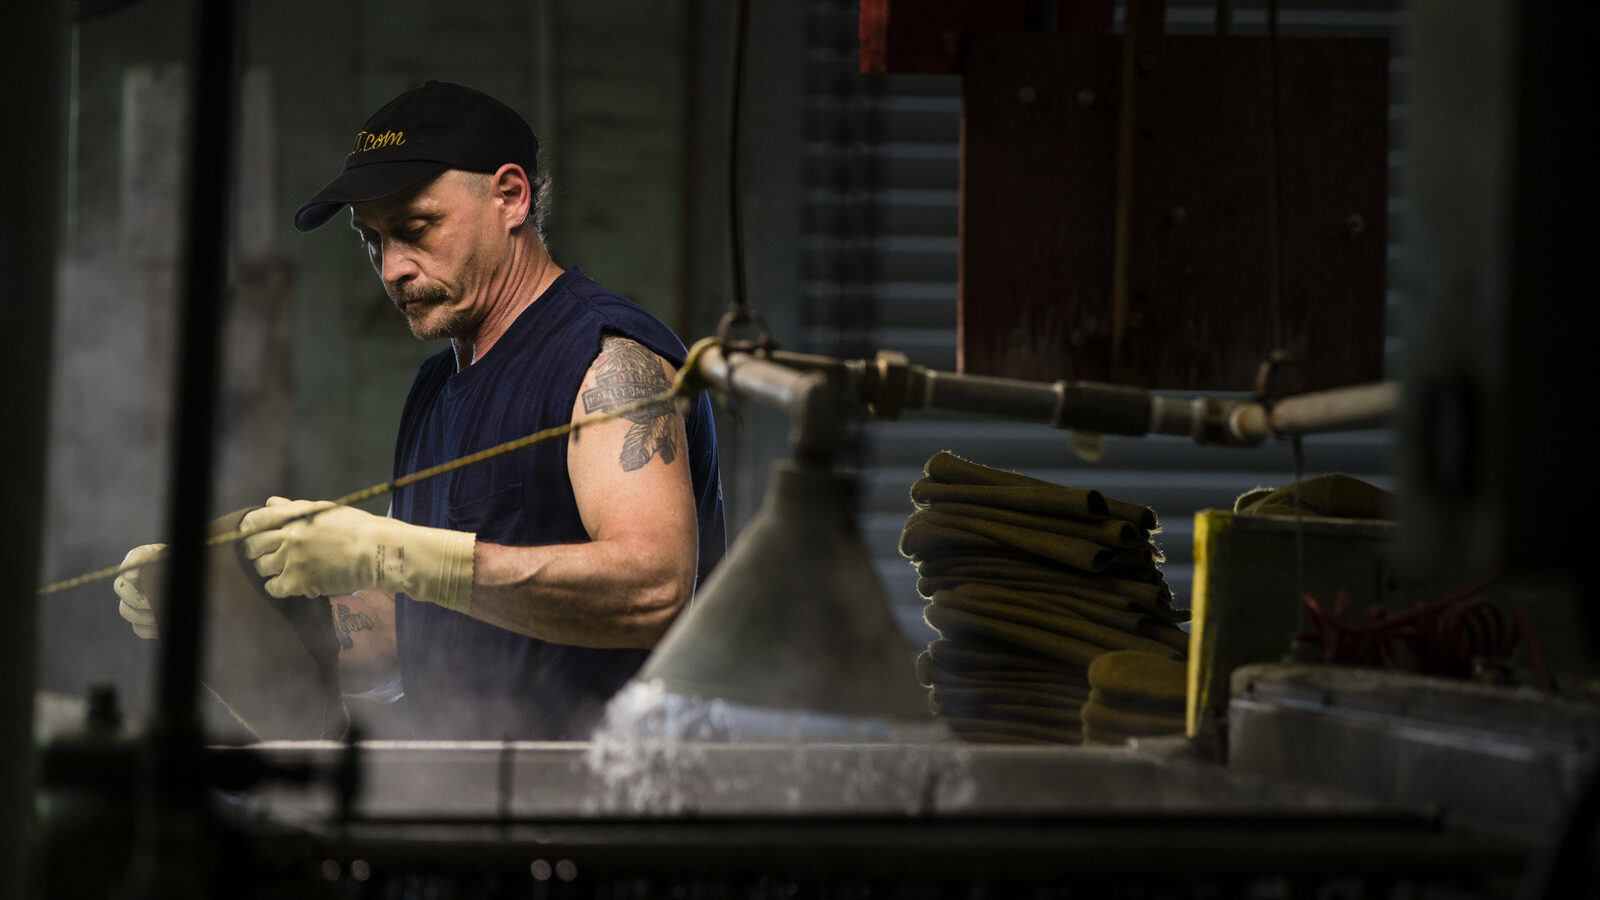 A worker takes part in the manufacturing of hats the Bollman Hat Company in Adamstown, Pa. (AP/Matt Rourke)